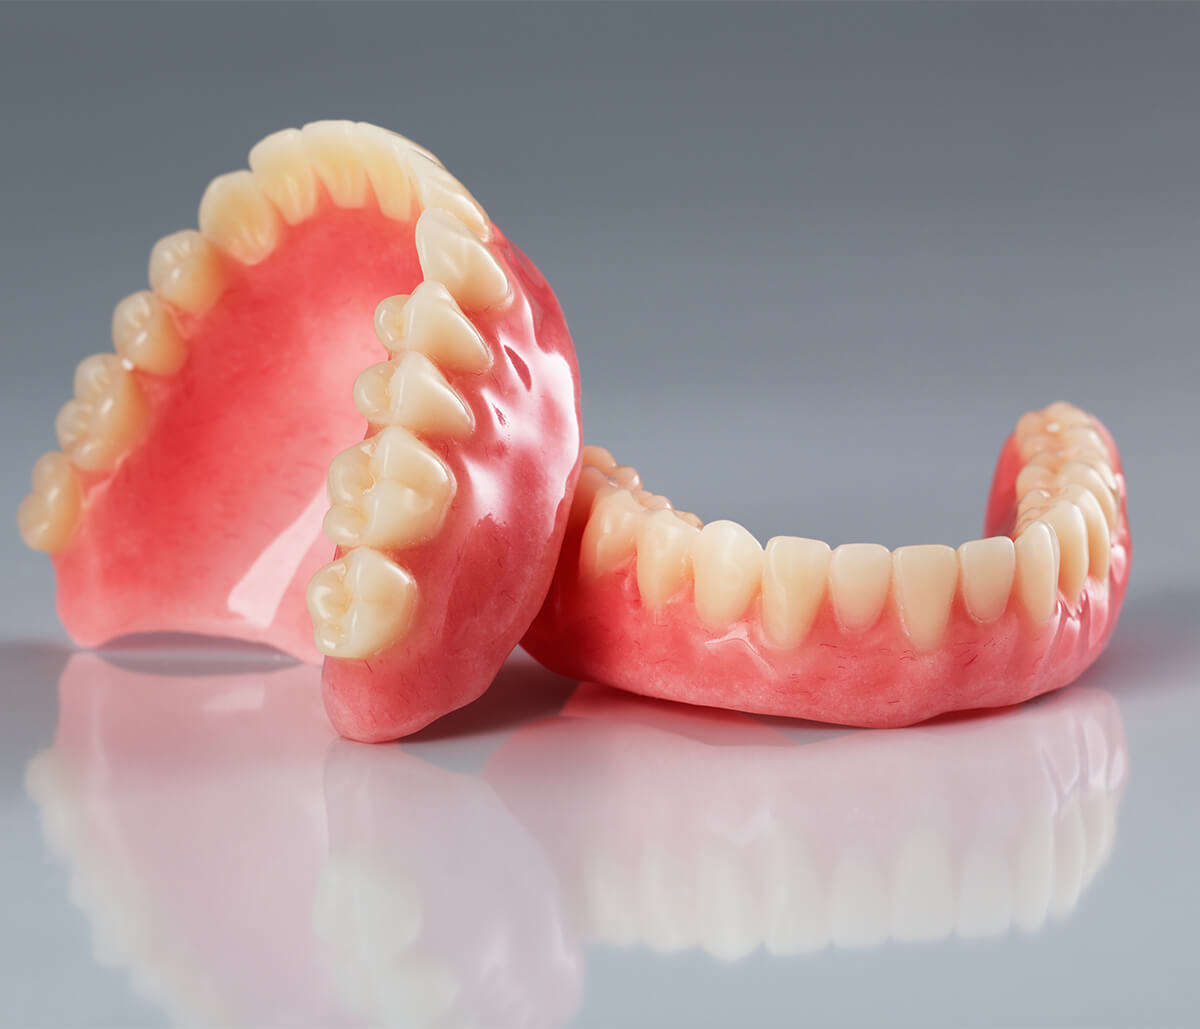 What Makes Modern Dentures a Good Choice for Replacing Lost Teeth?